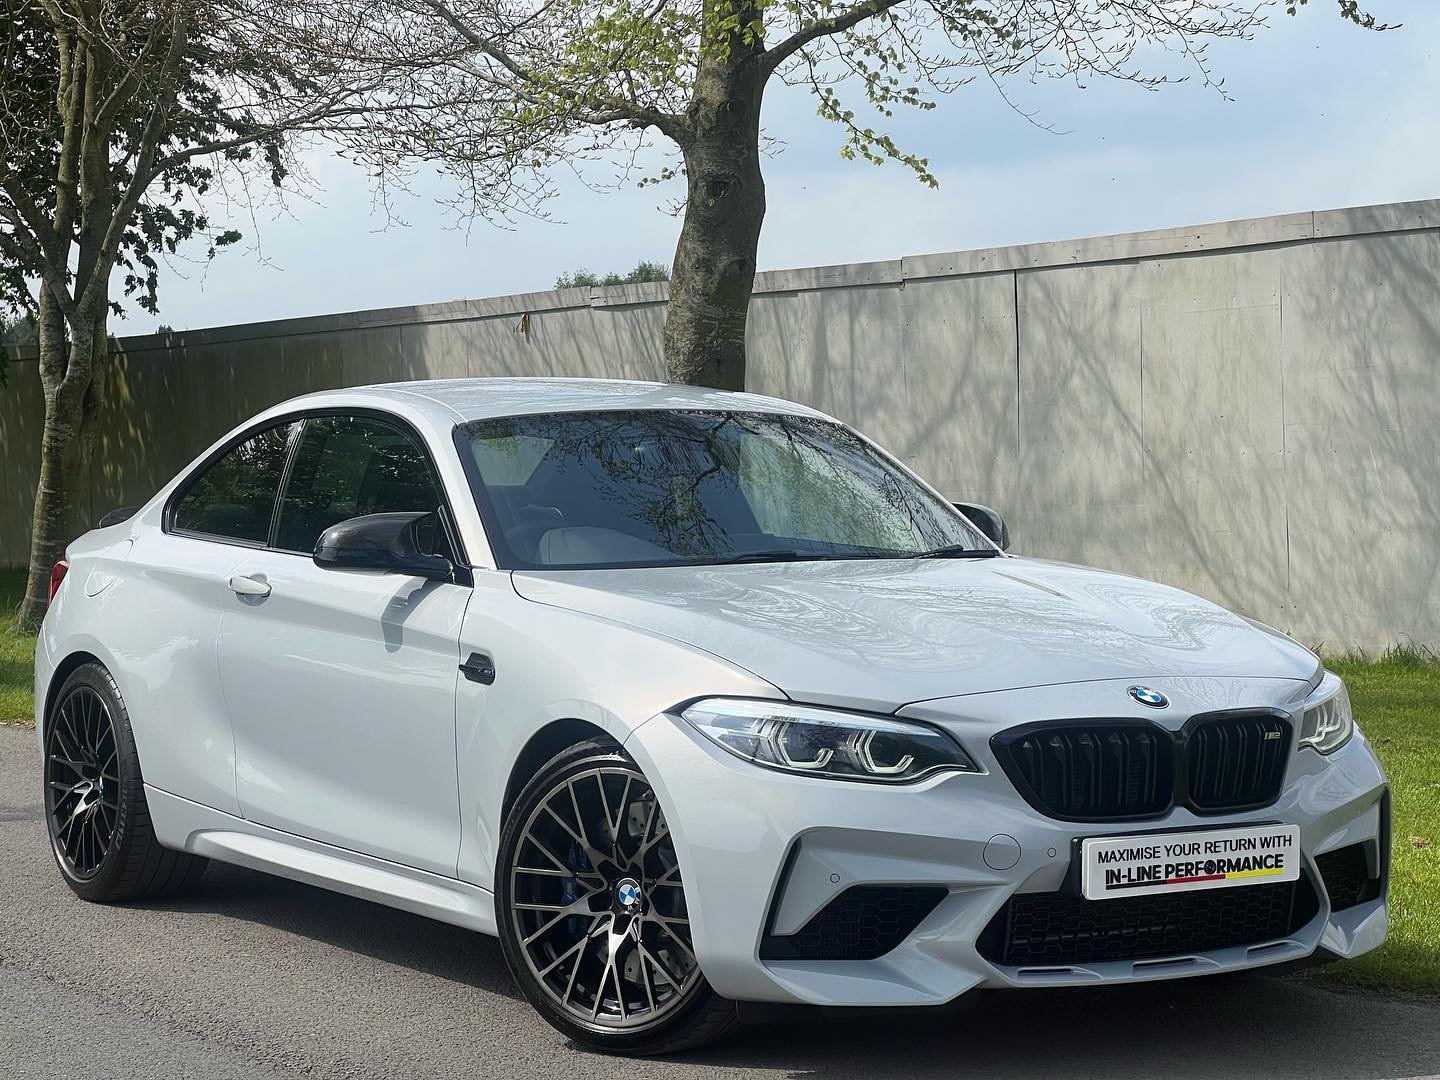 Here at IN-LINE PERFORMANCE We Take Pride and Joy into Supplying you with Great Quality of the Very Best of Performance Engineering. We are Proud to Present to you this 2019 BMW M2 Competition Finished in A Desirable Hockenheim Silver with Black Dako